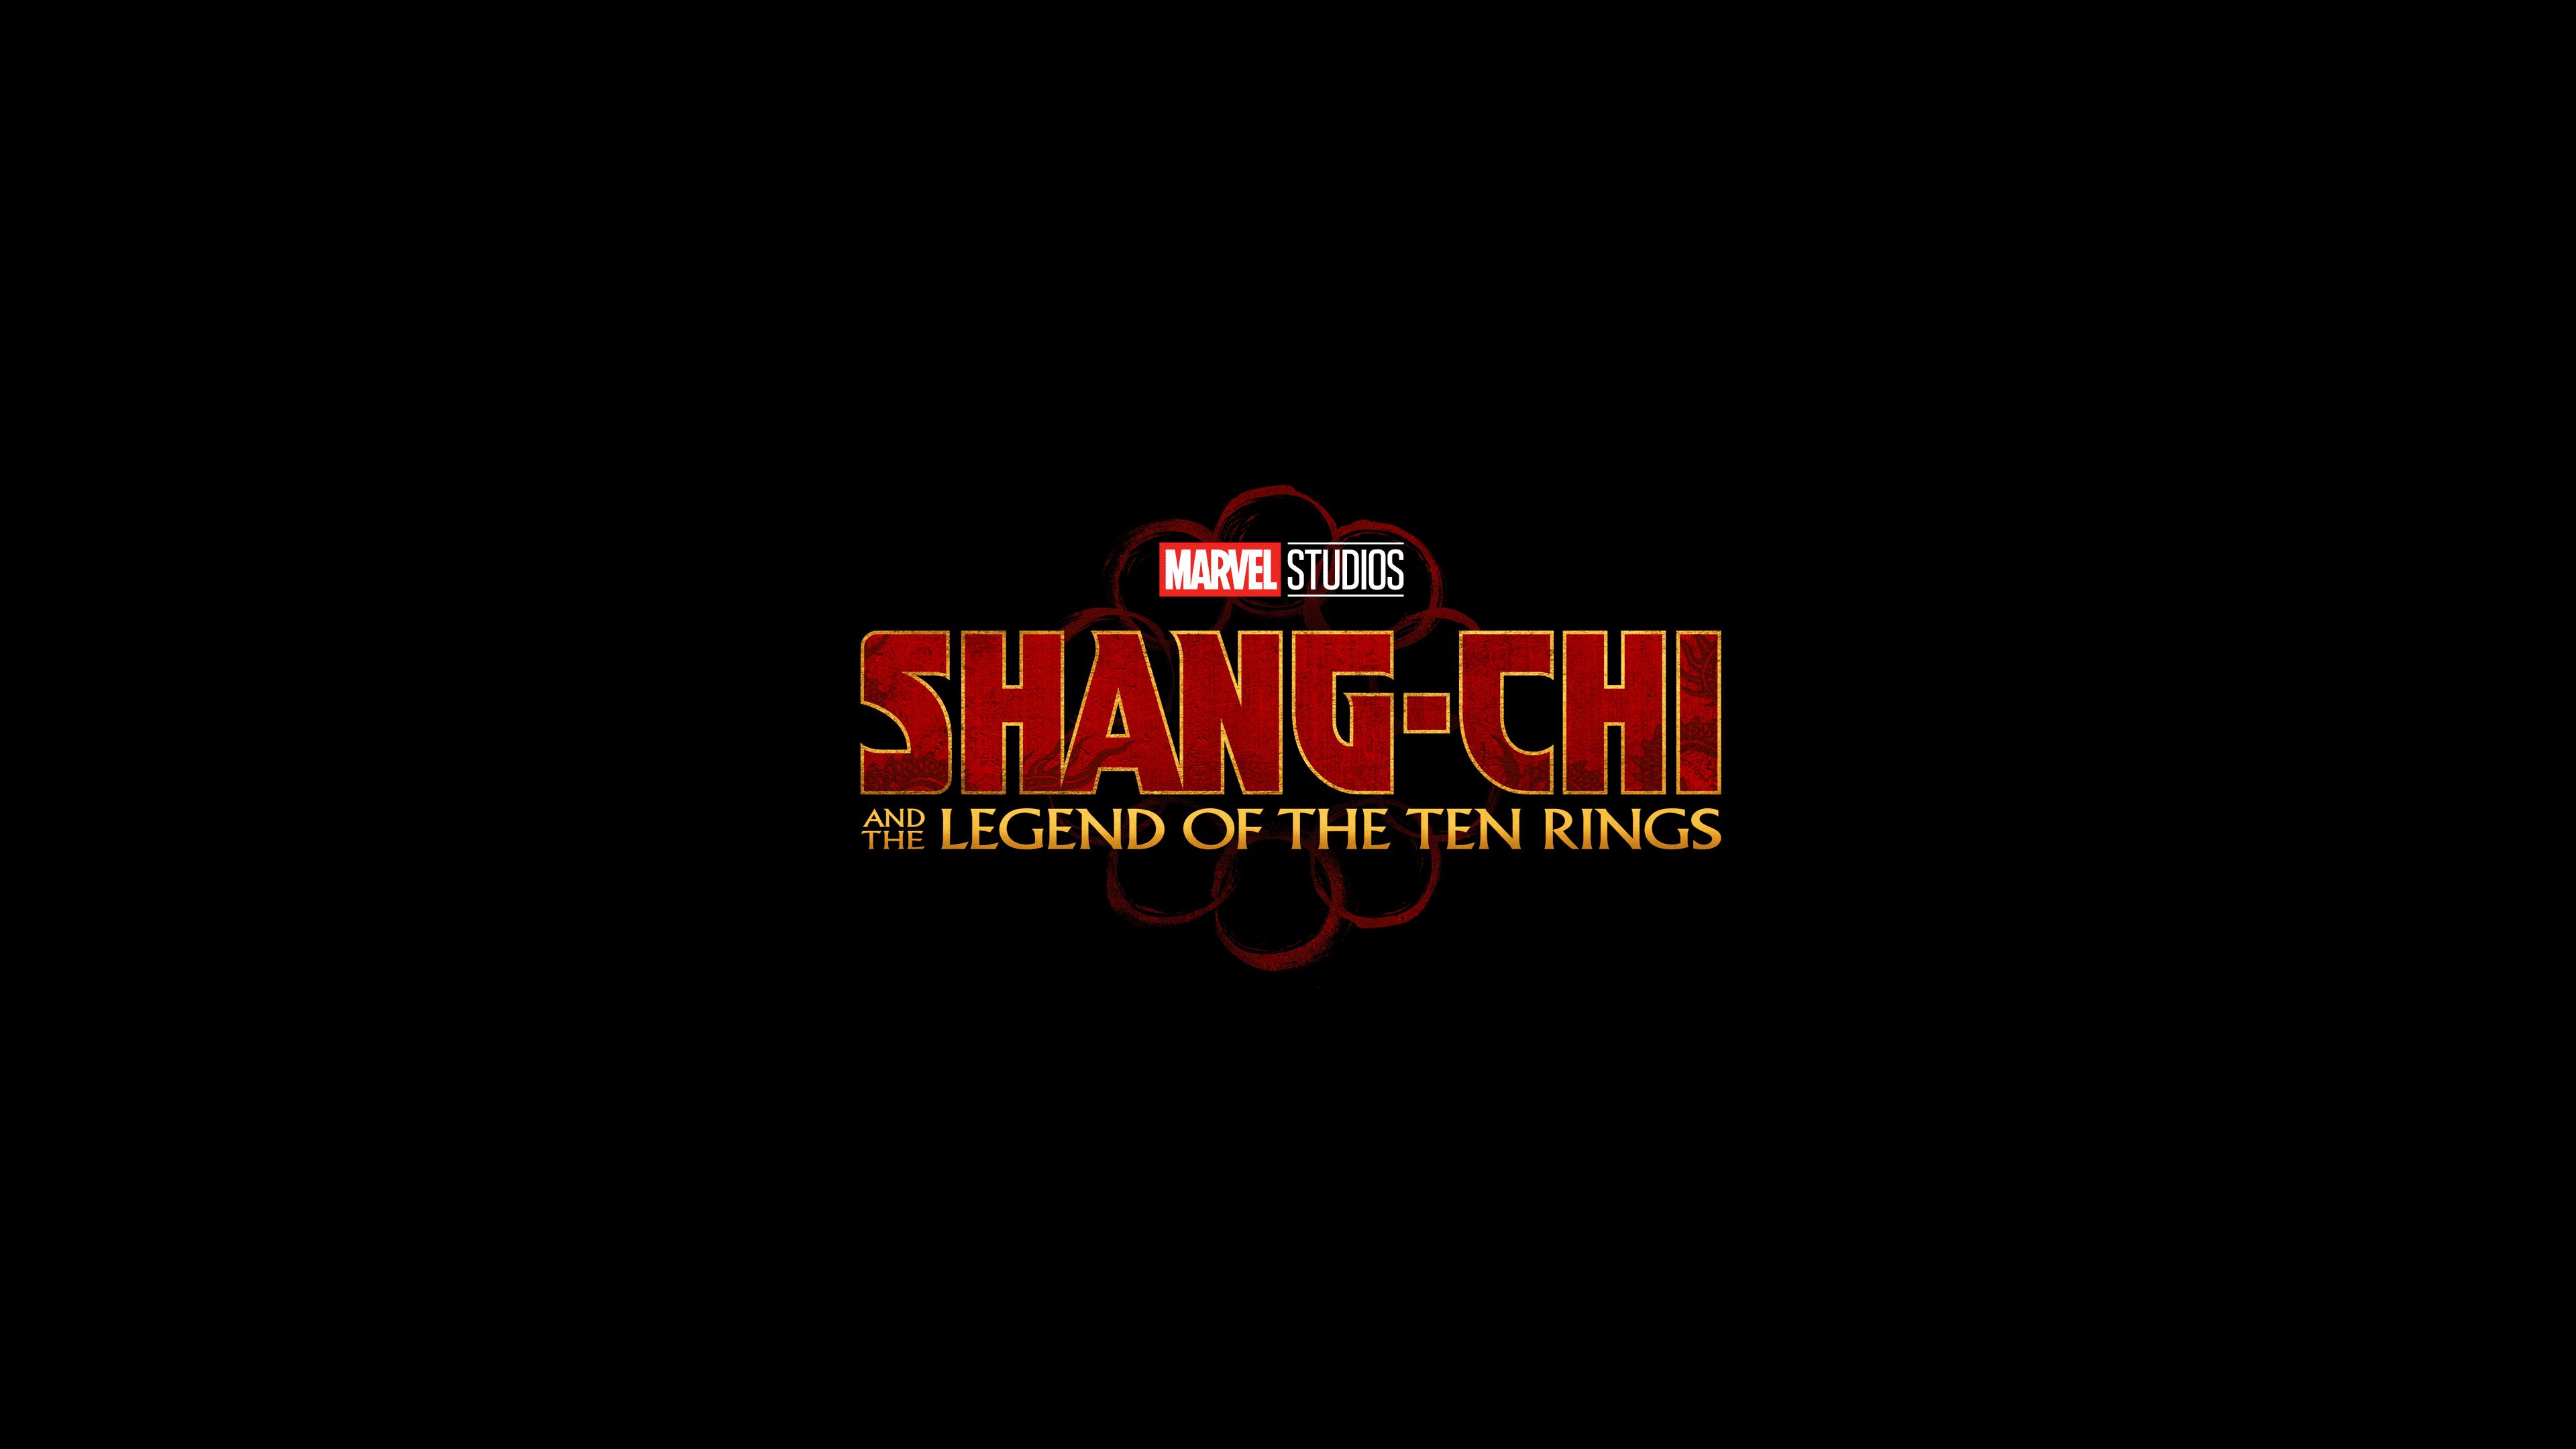 Shang Chi And The Legend Of The Ten Rings Comic Con 2019 Wallpaper